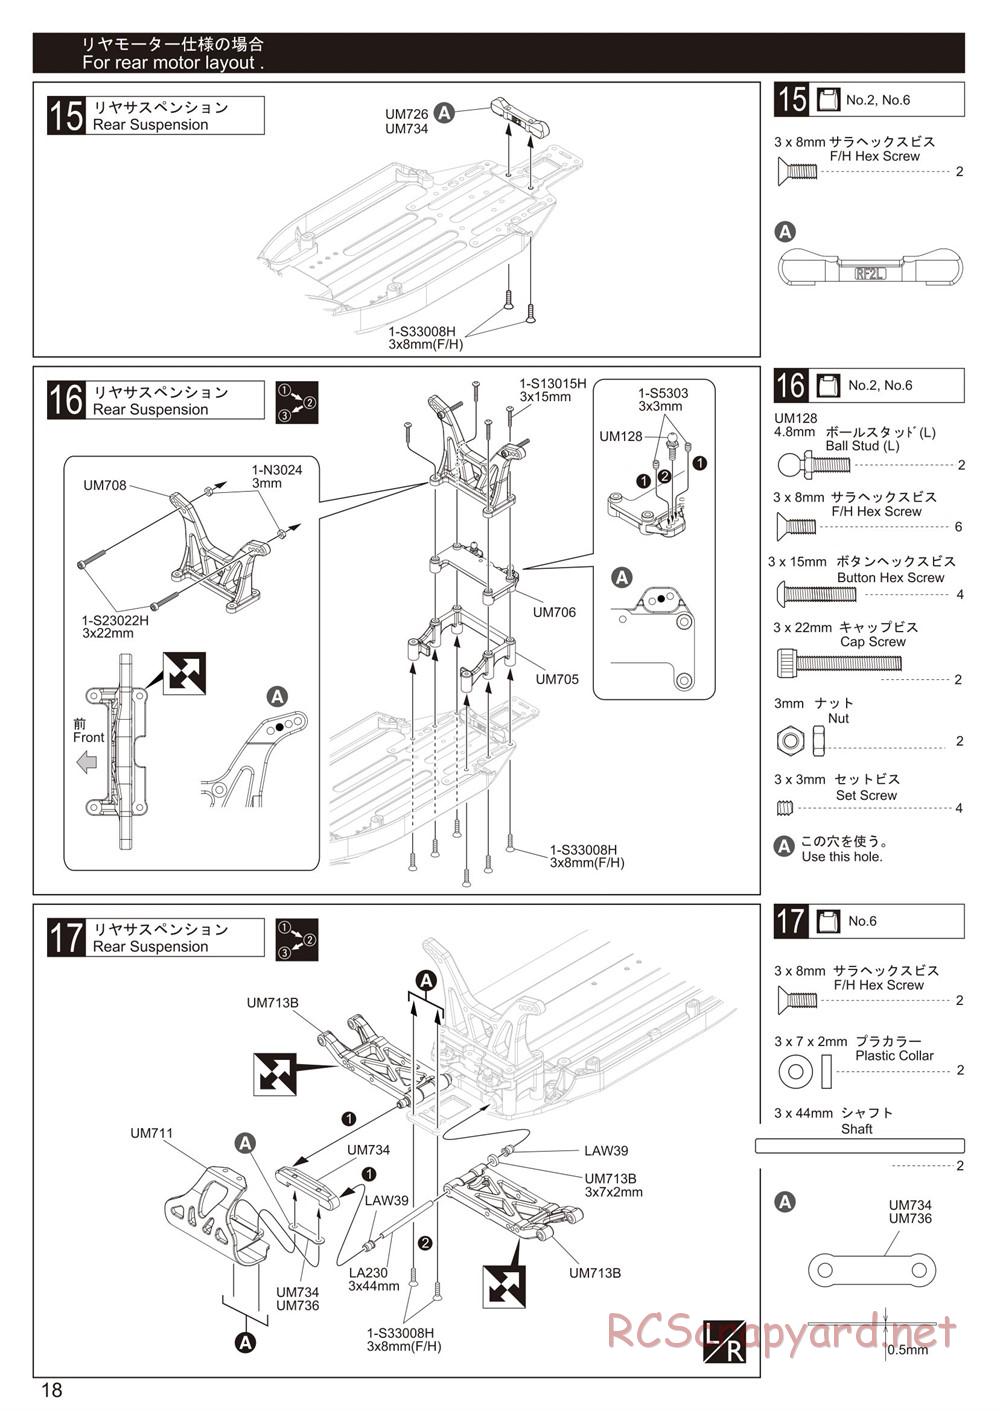 Kyosho - Ultima RB6.6 - Manual - Page 18